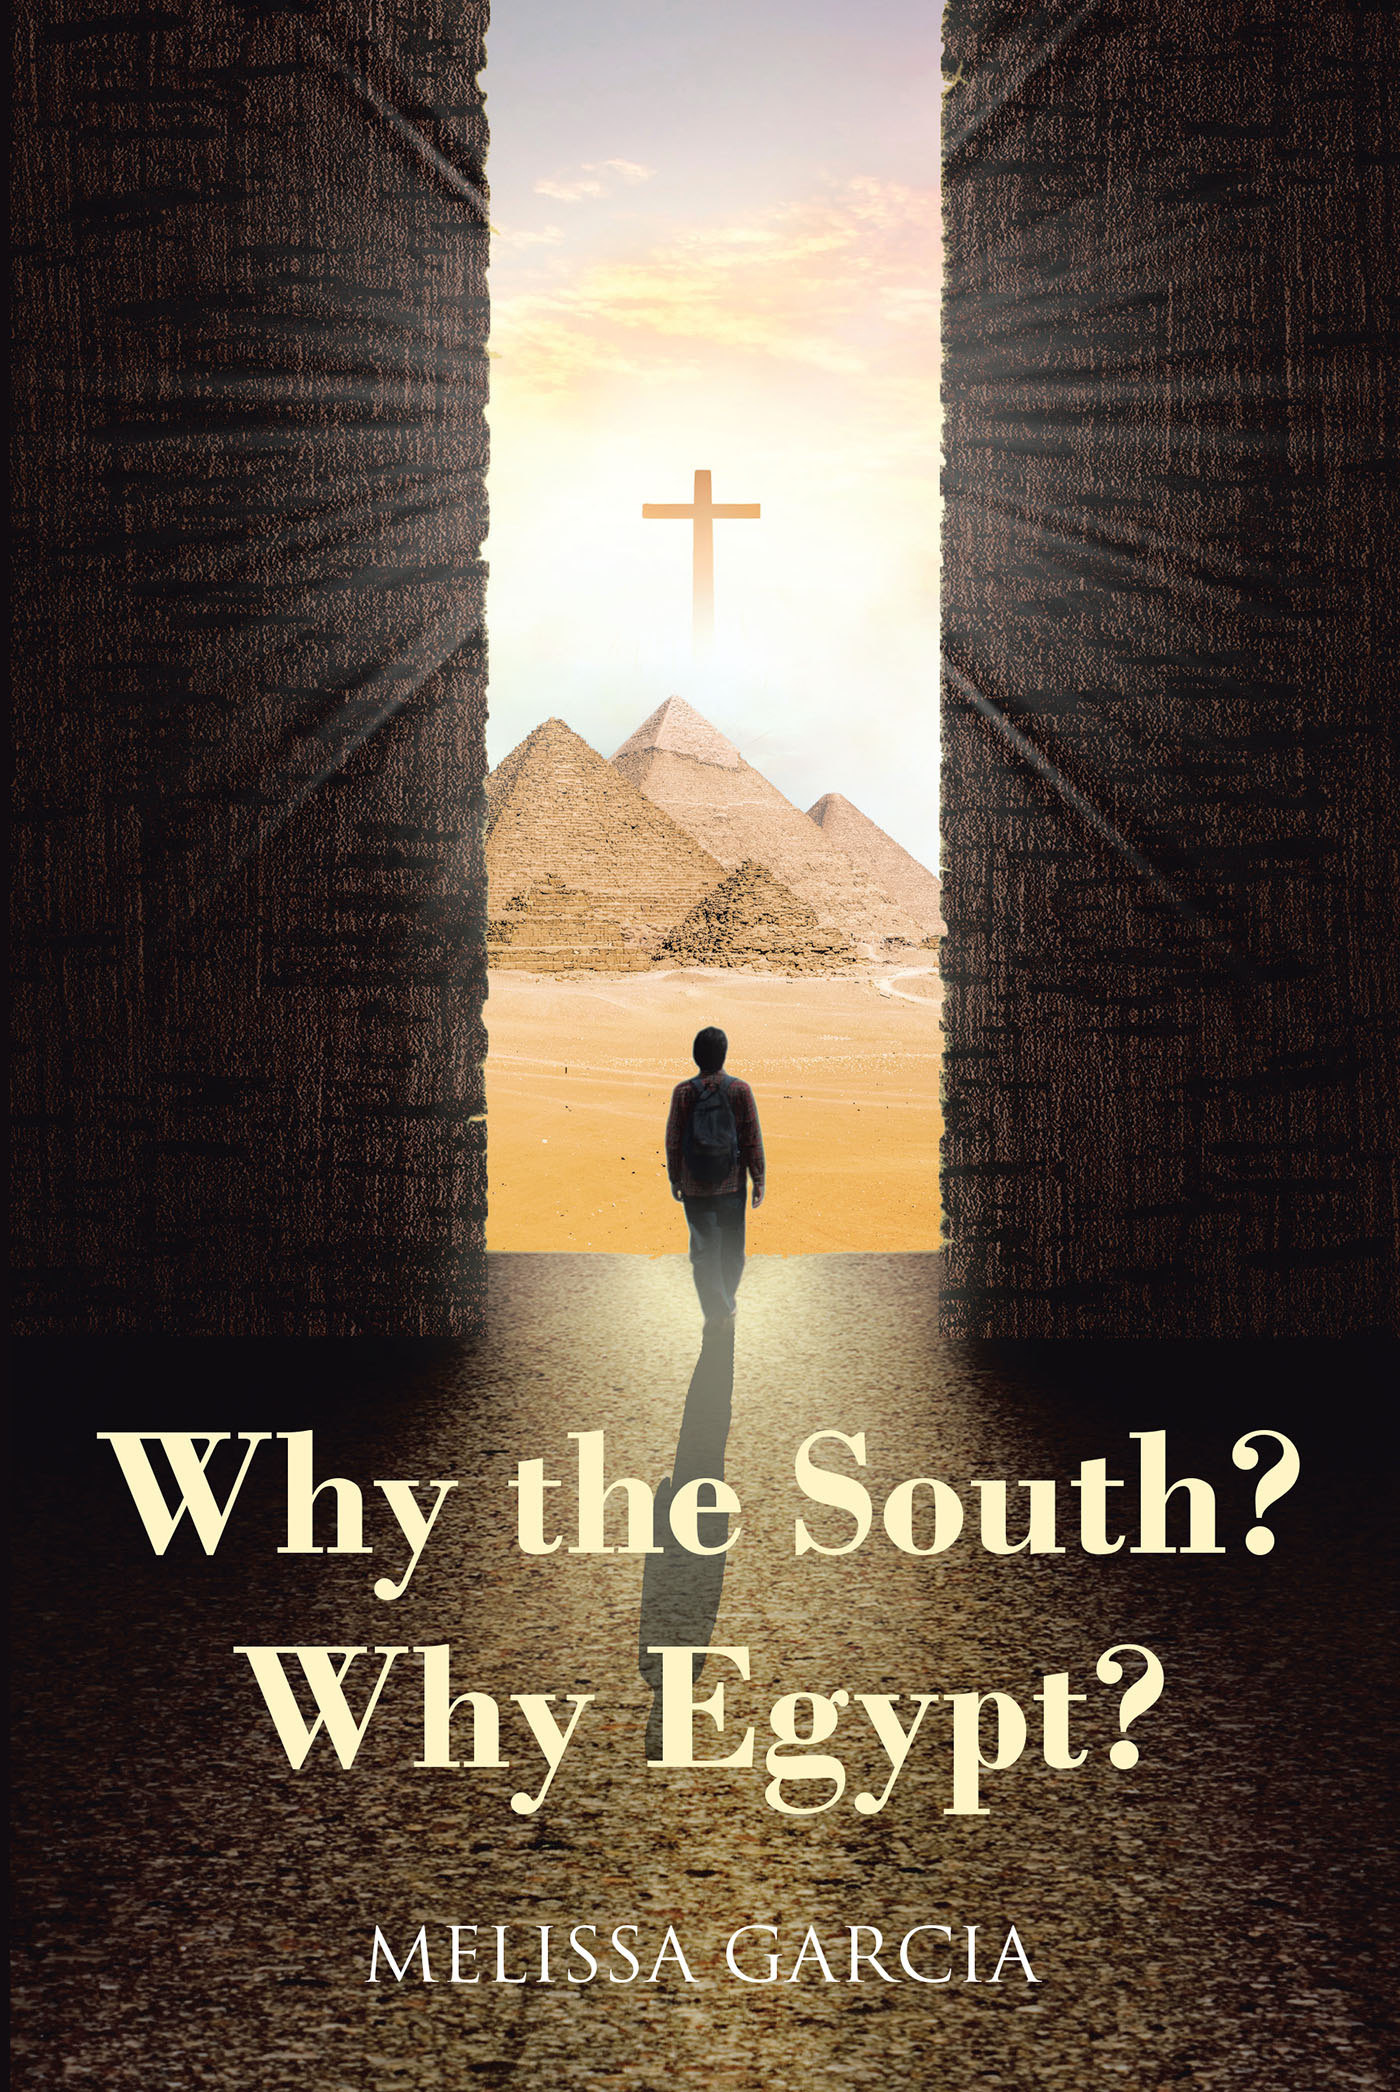 Melissa Garcia’s Newly Released “Why the South? Why Egypt?” Provides Perspective on How We Face Our Moments of Uncertainty